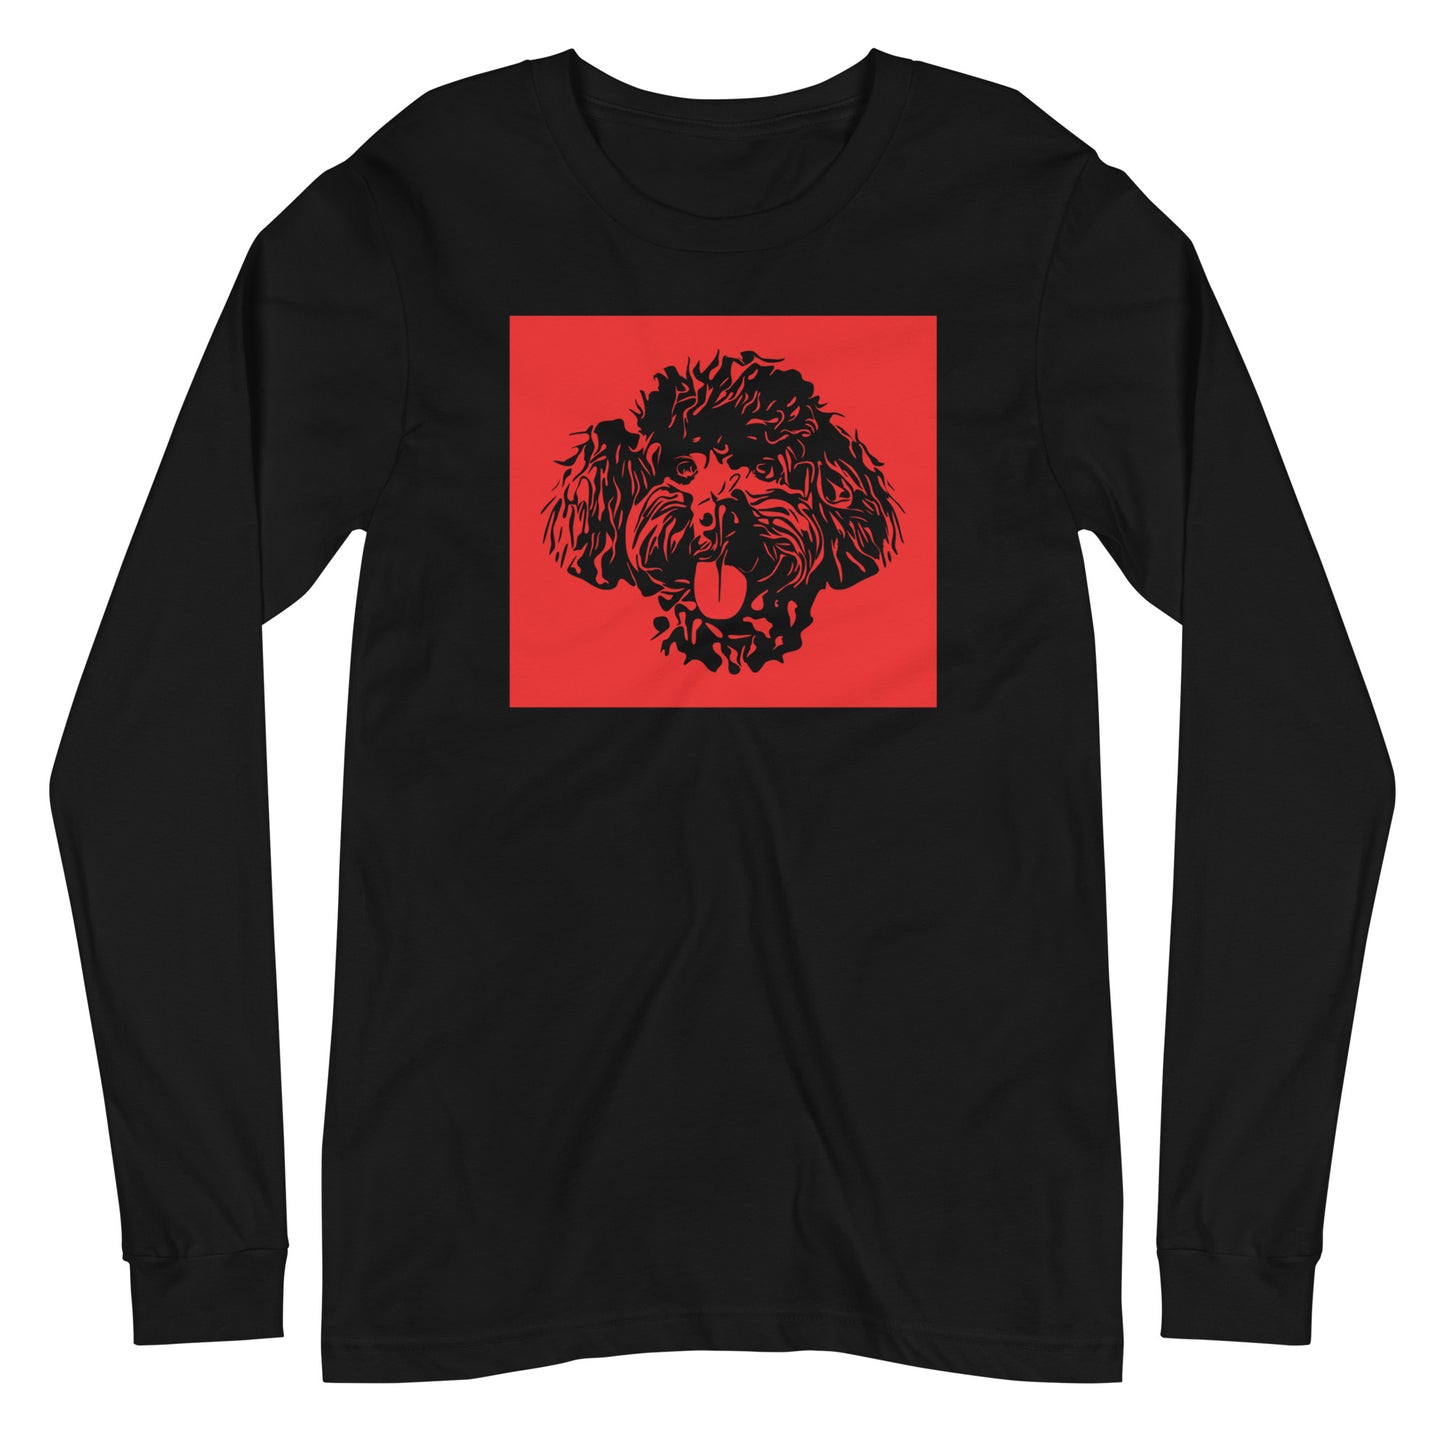 Toy Poodle face silhouette with red background square on unisex black long sleeve t-shirt